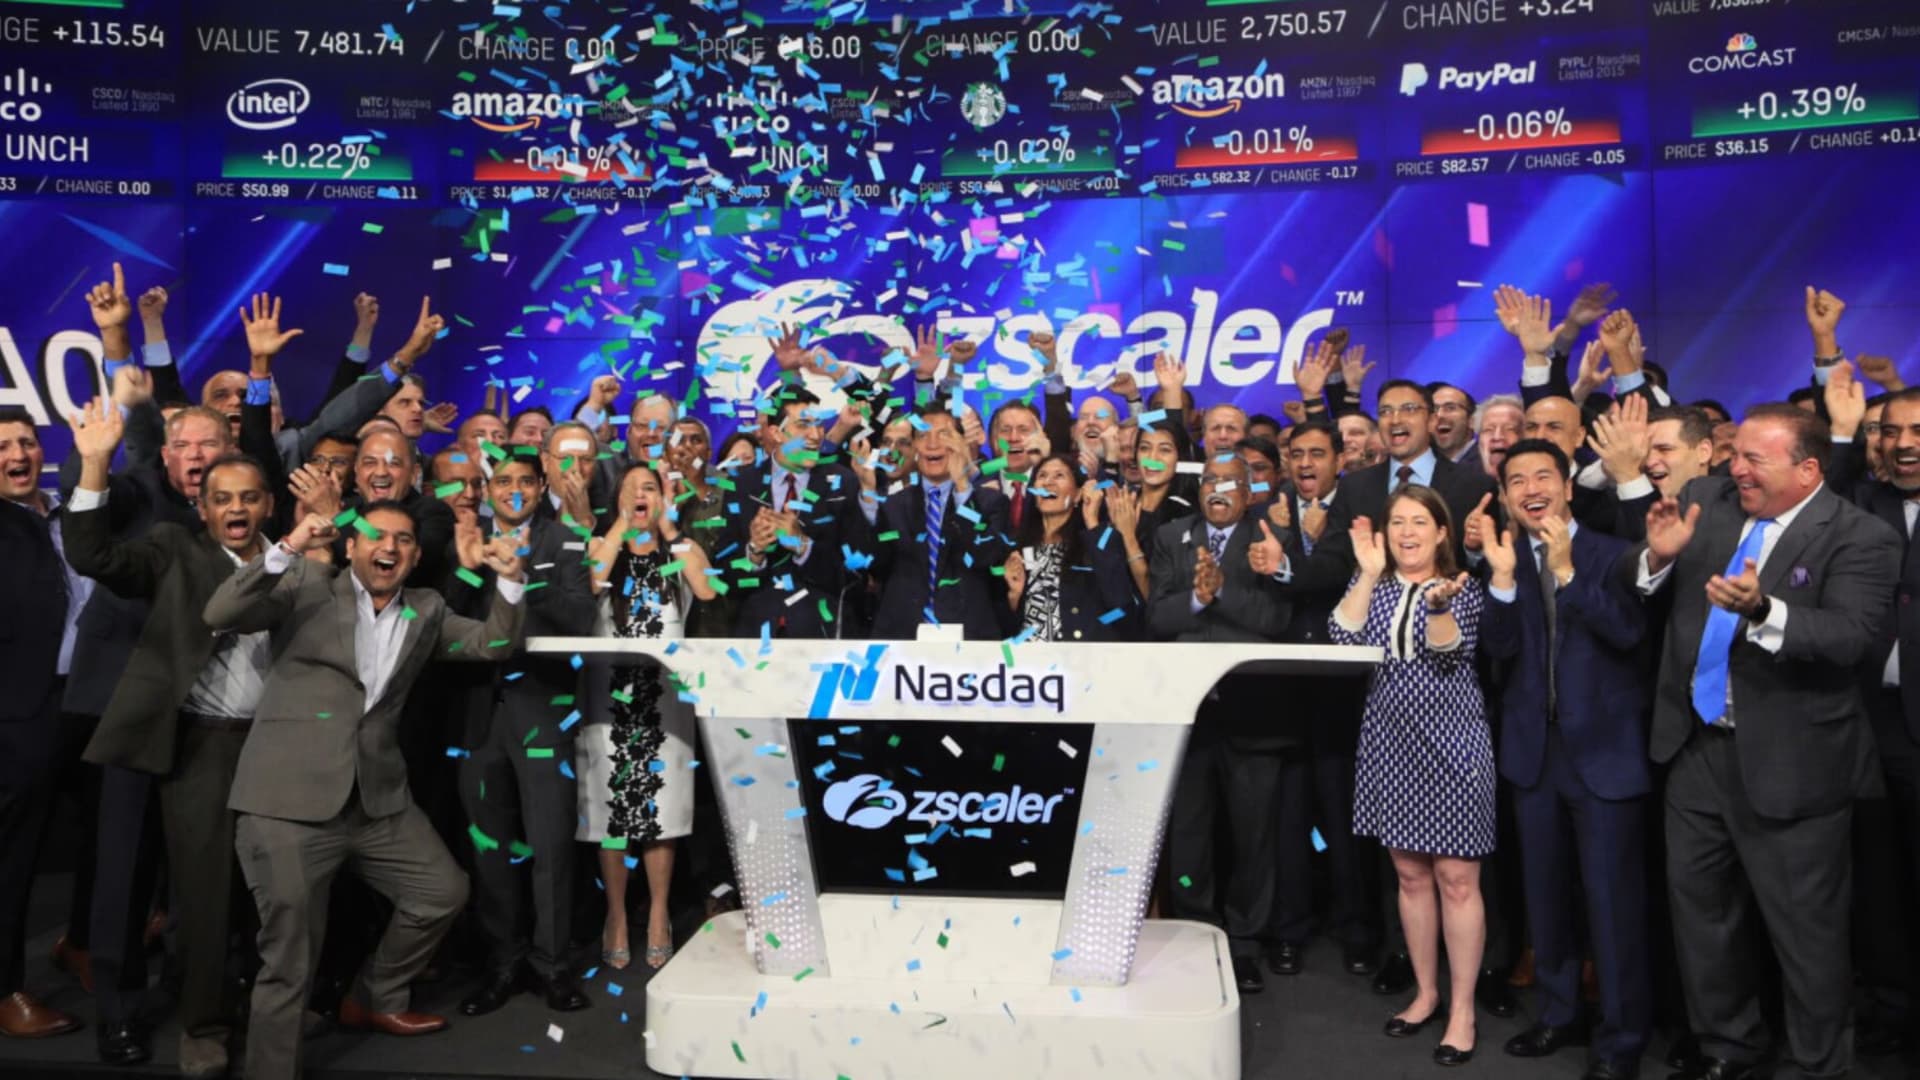 Zscaler, Marvell, DoorDash and more